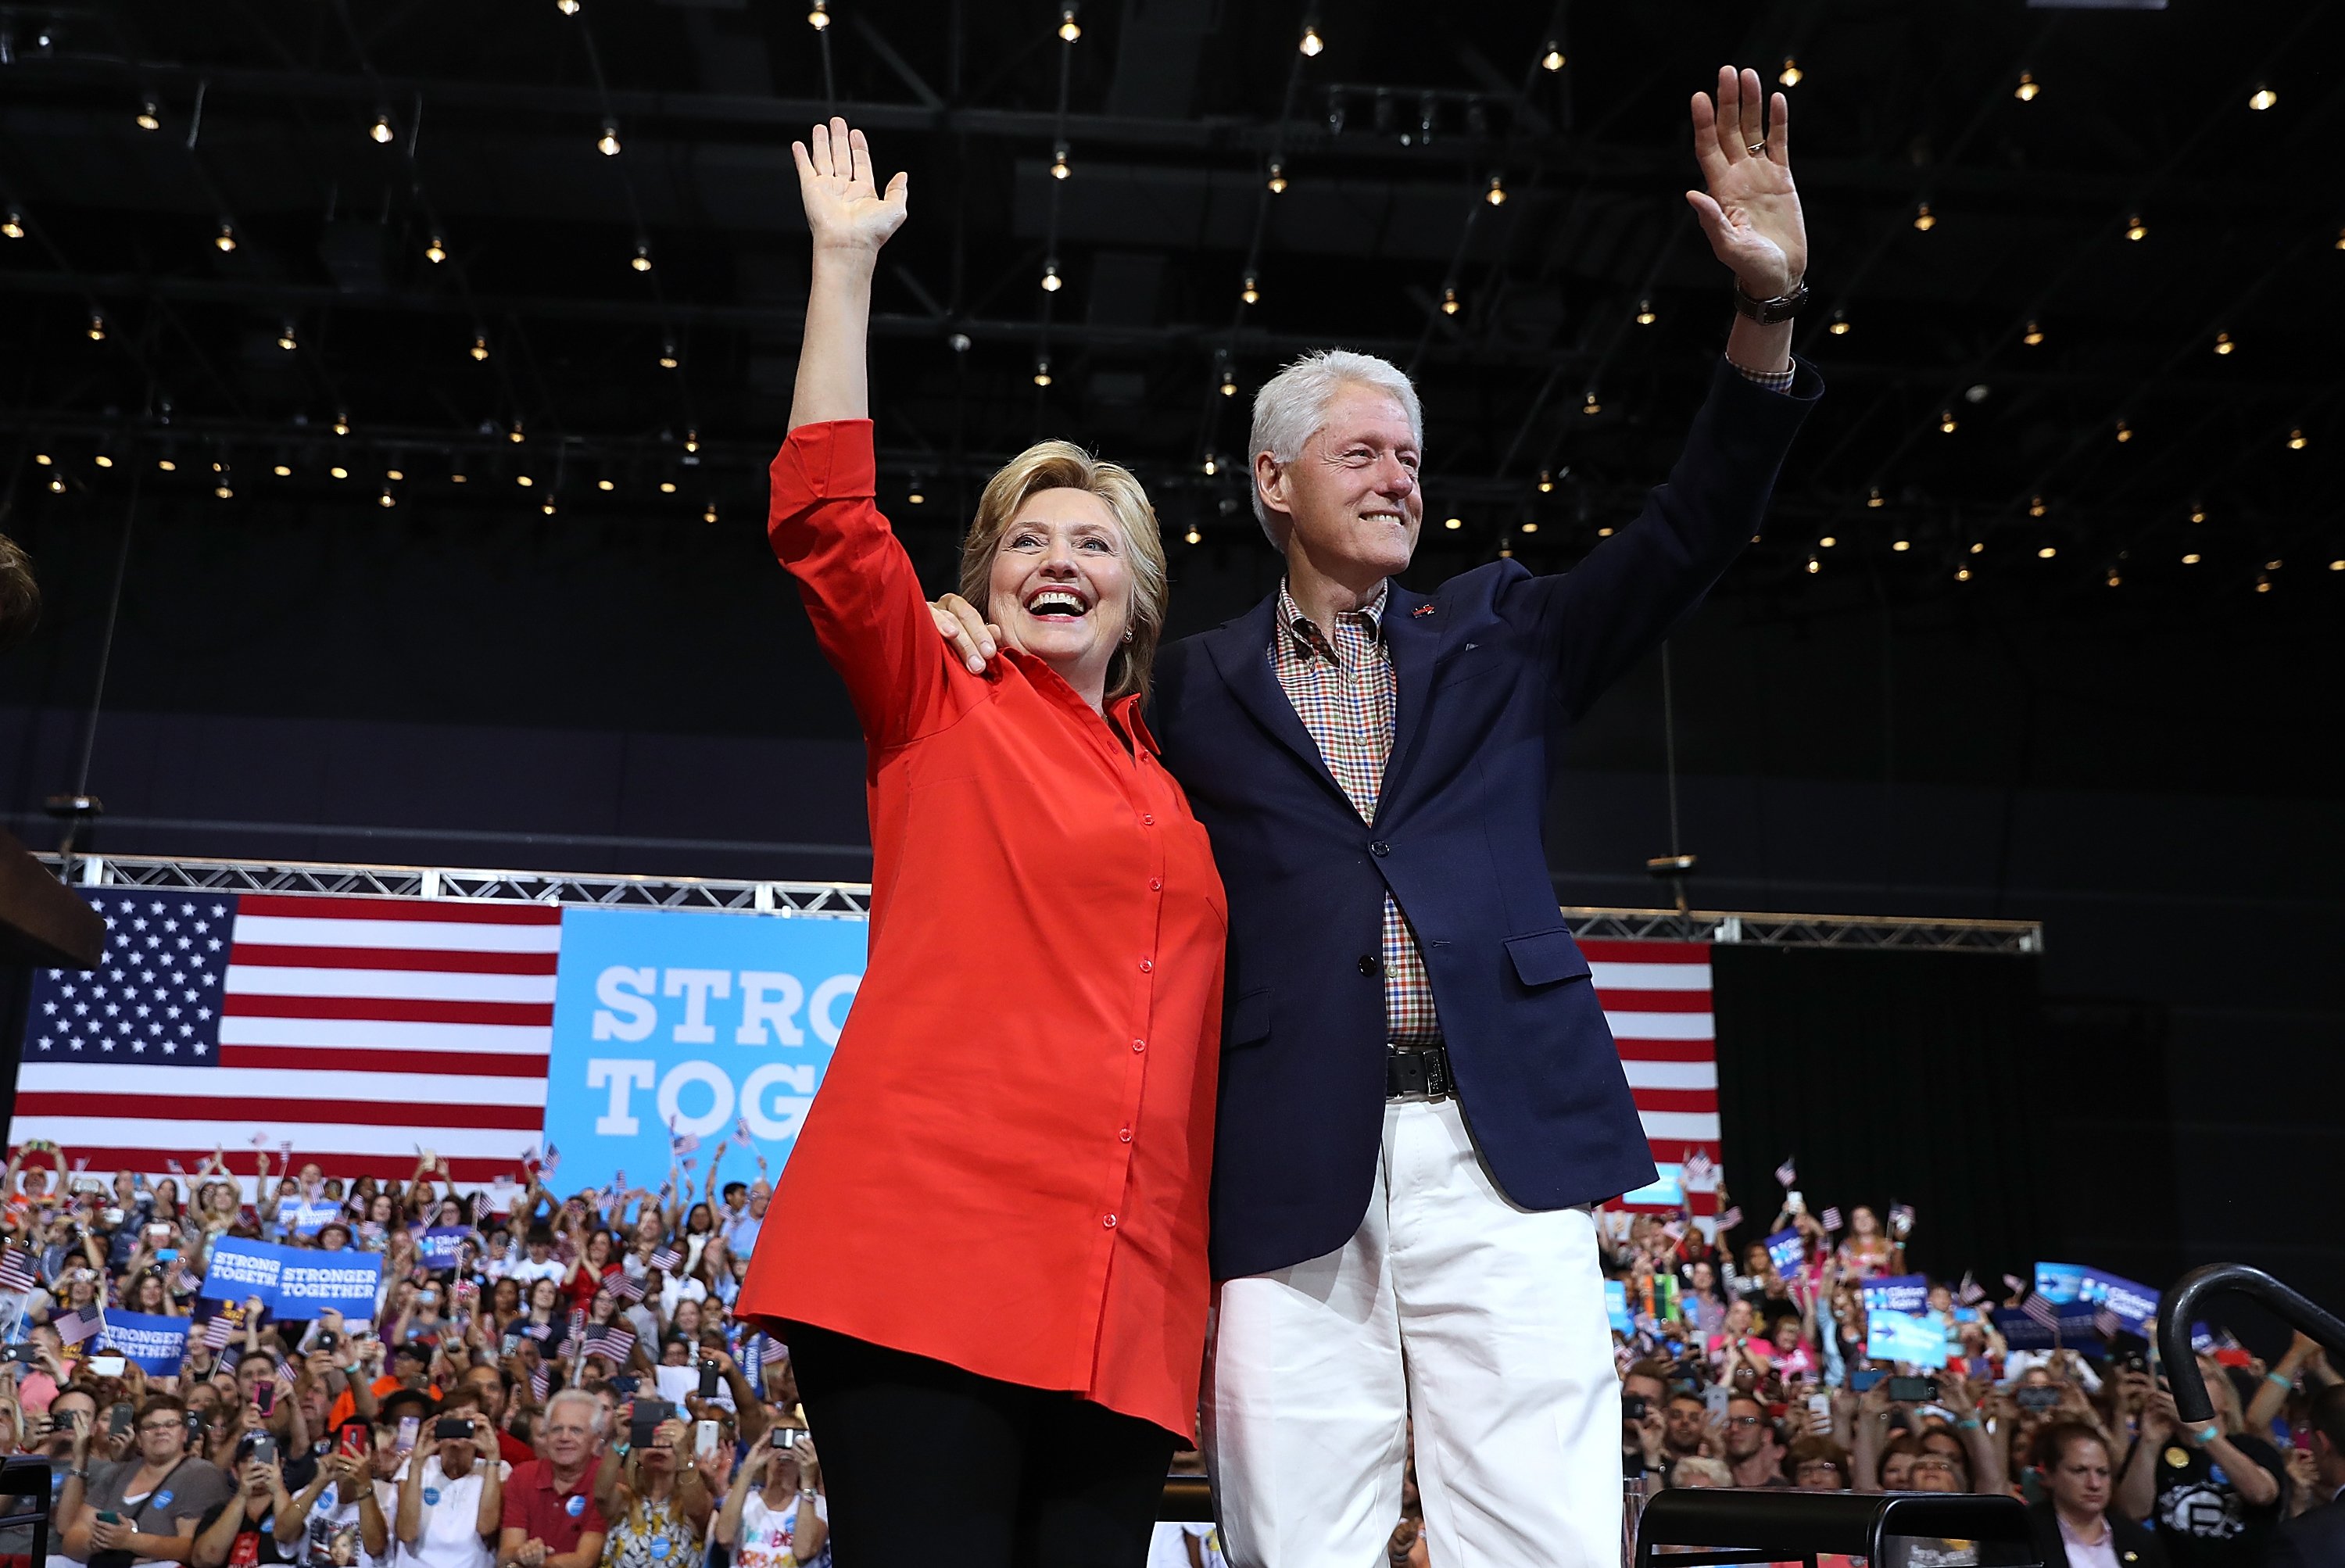 Hillary and Bill Clinton during a campaign rally at the David L. Lawrence Convention Center on July 30, 2016 in Pittsburgh, Pennsylvania | Photo: Getty Images